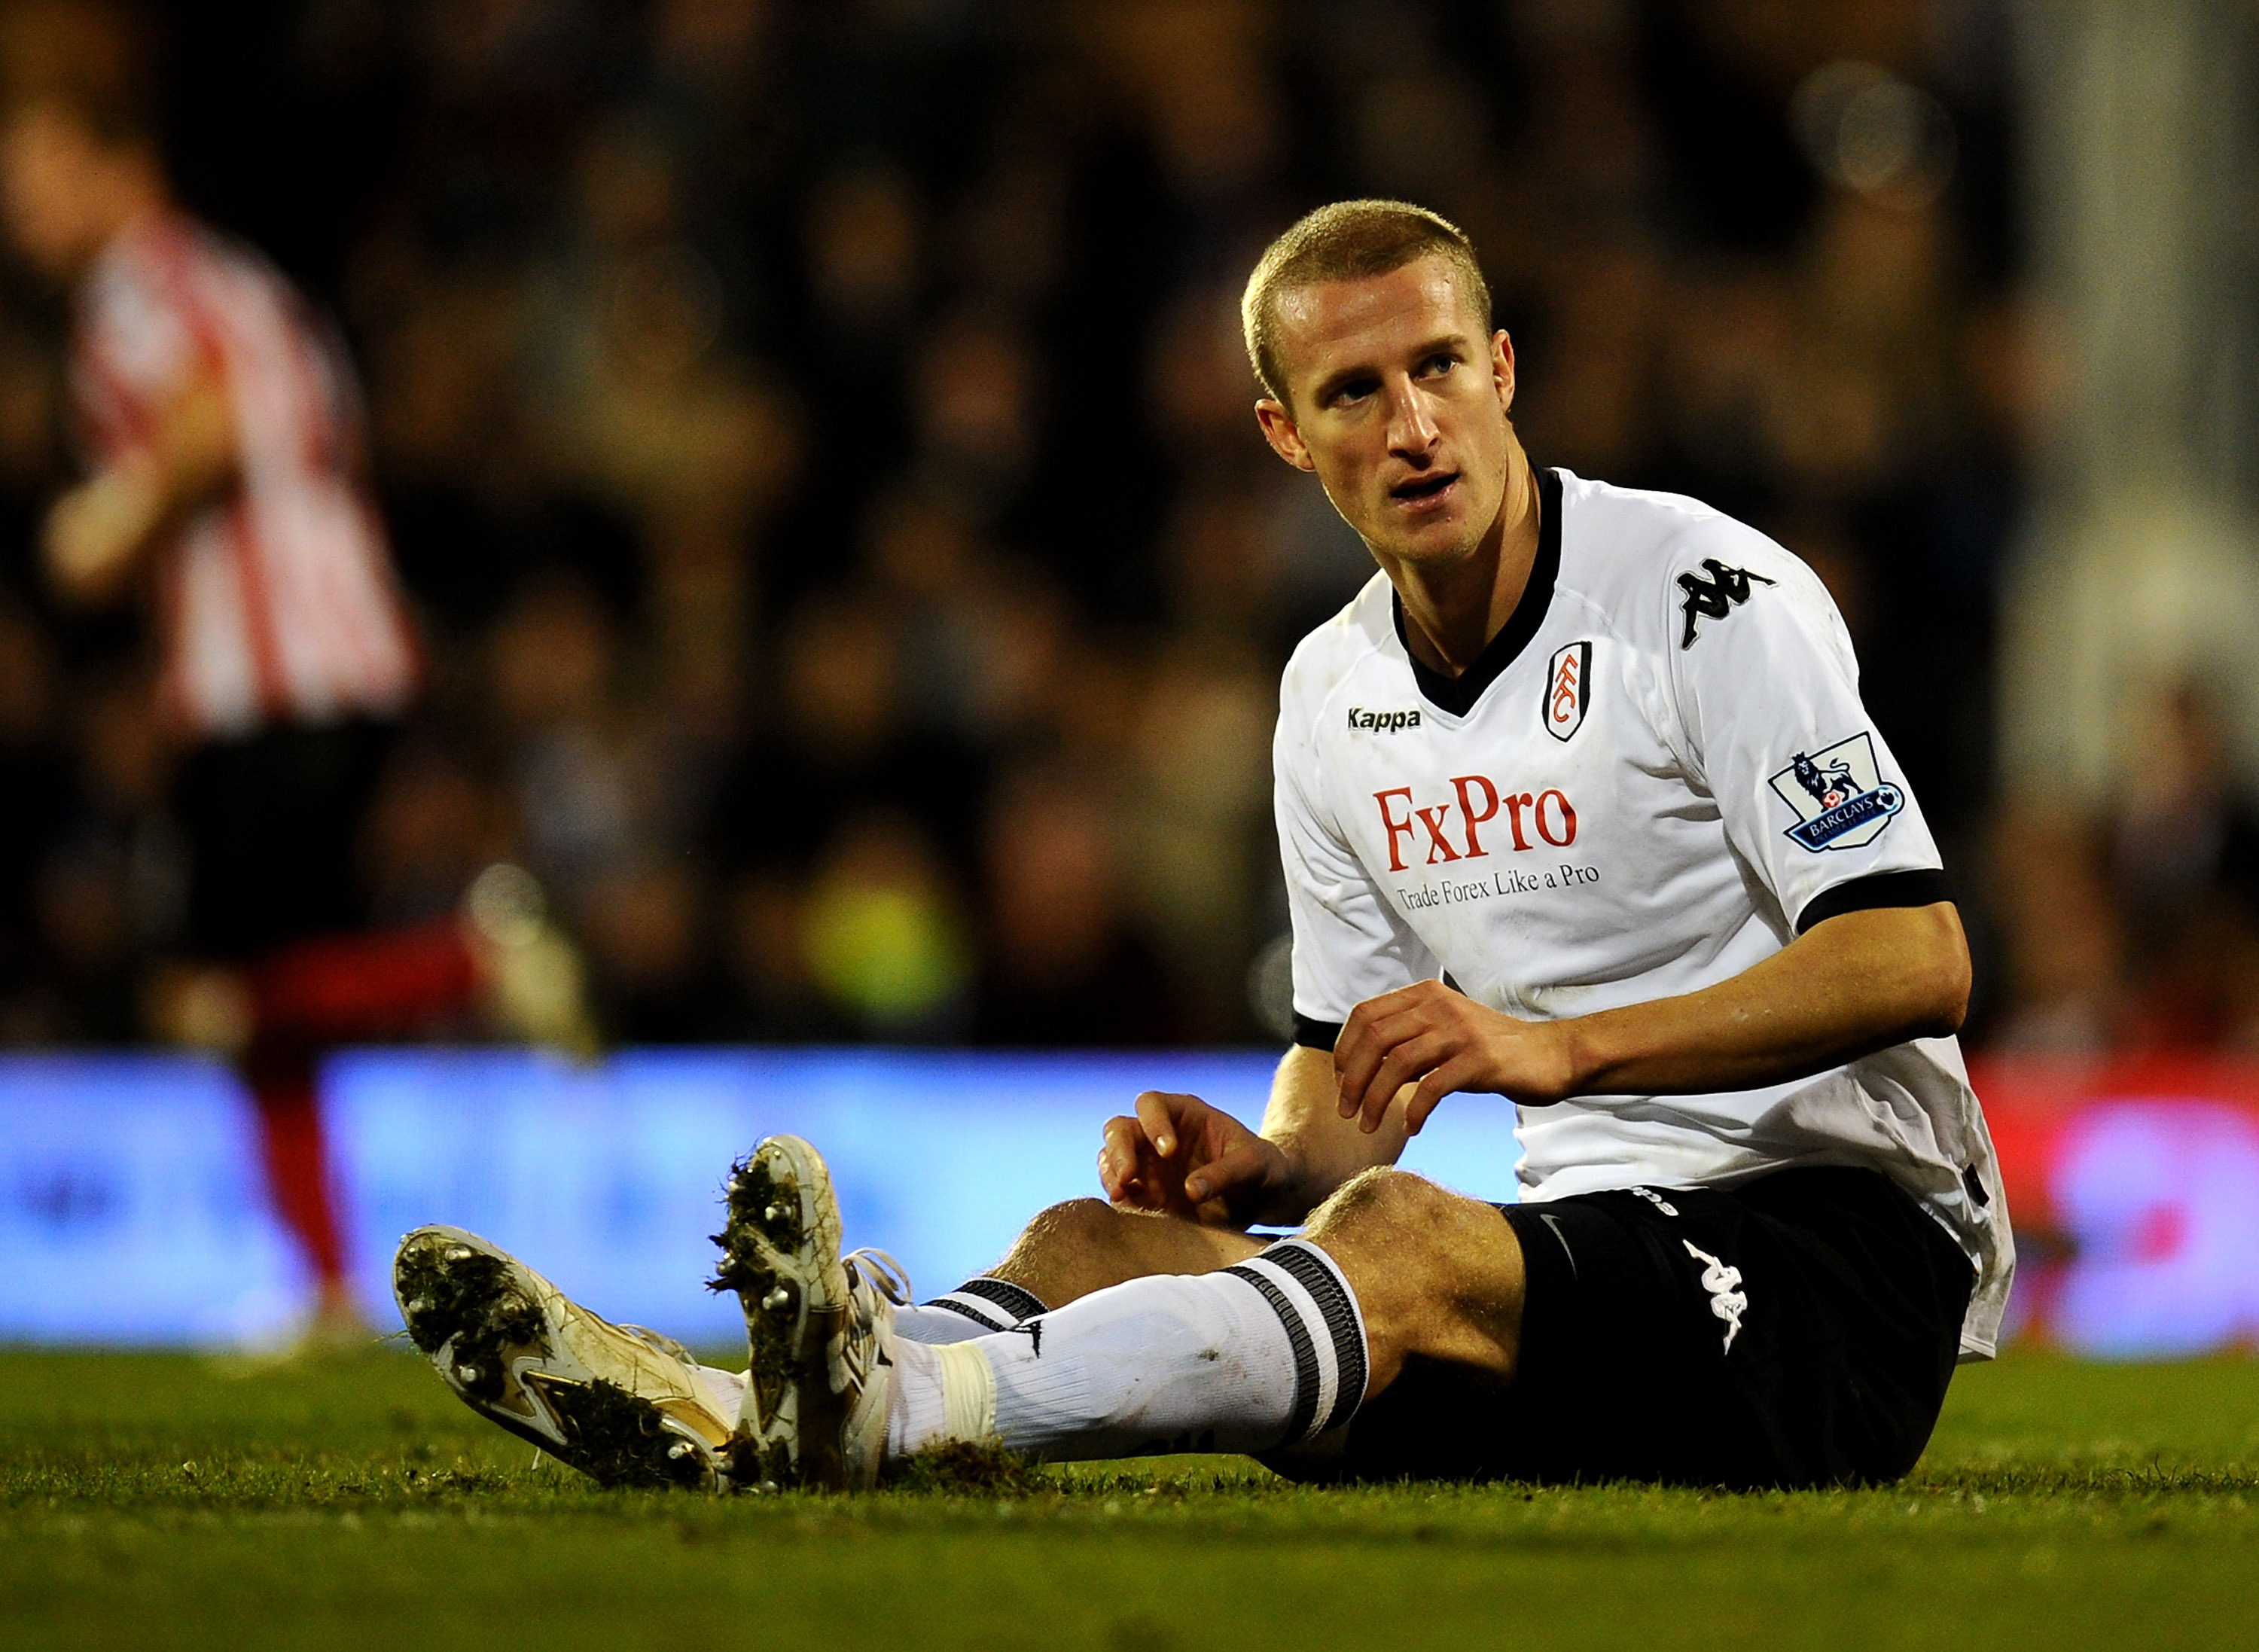 LONDON, ENGLAND - DECEMBER 11:  Brede Hangeland of Fulham reacts during the Barclays Premier League match between Fulham and Sunderland at Craven Cottage on December 11, 2010 in London, England.  (Photo by Clive Mason/Getty Images)